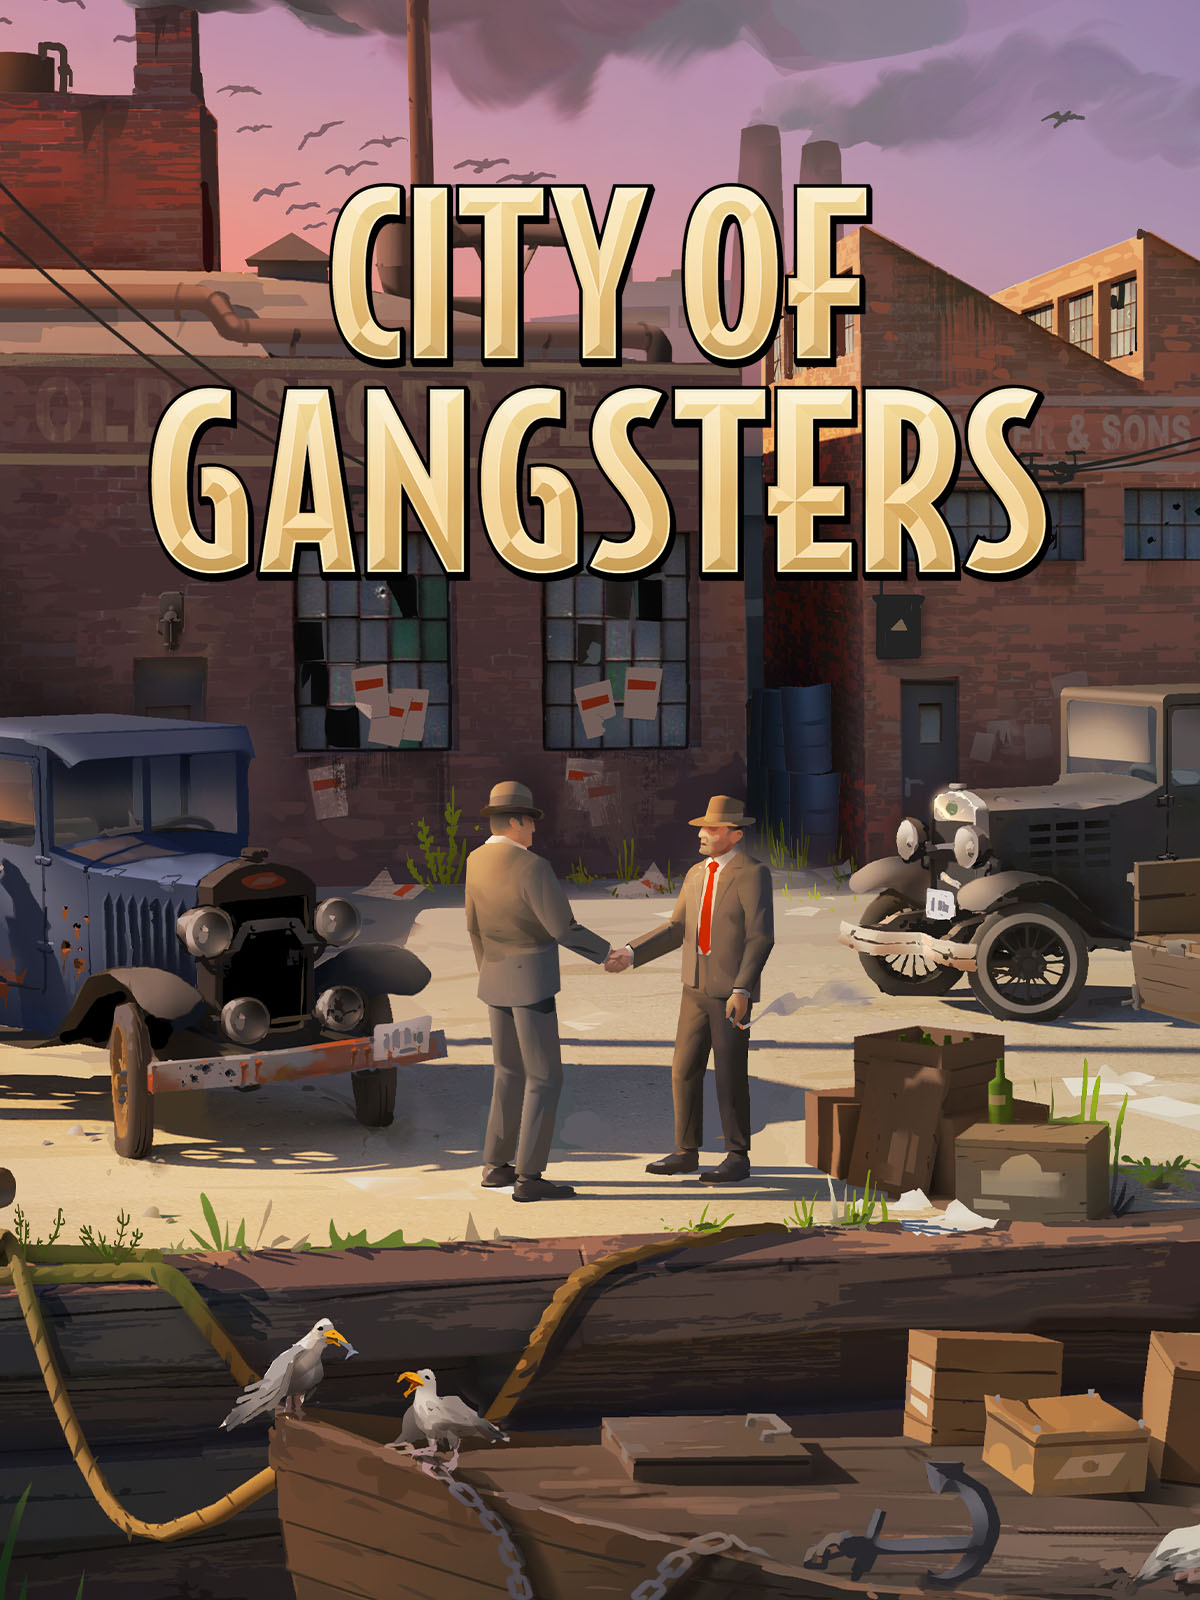 City of Gangsters Free